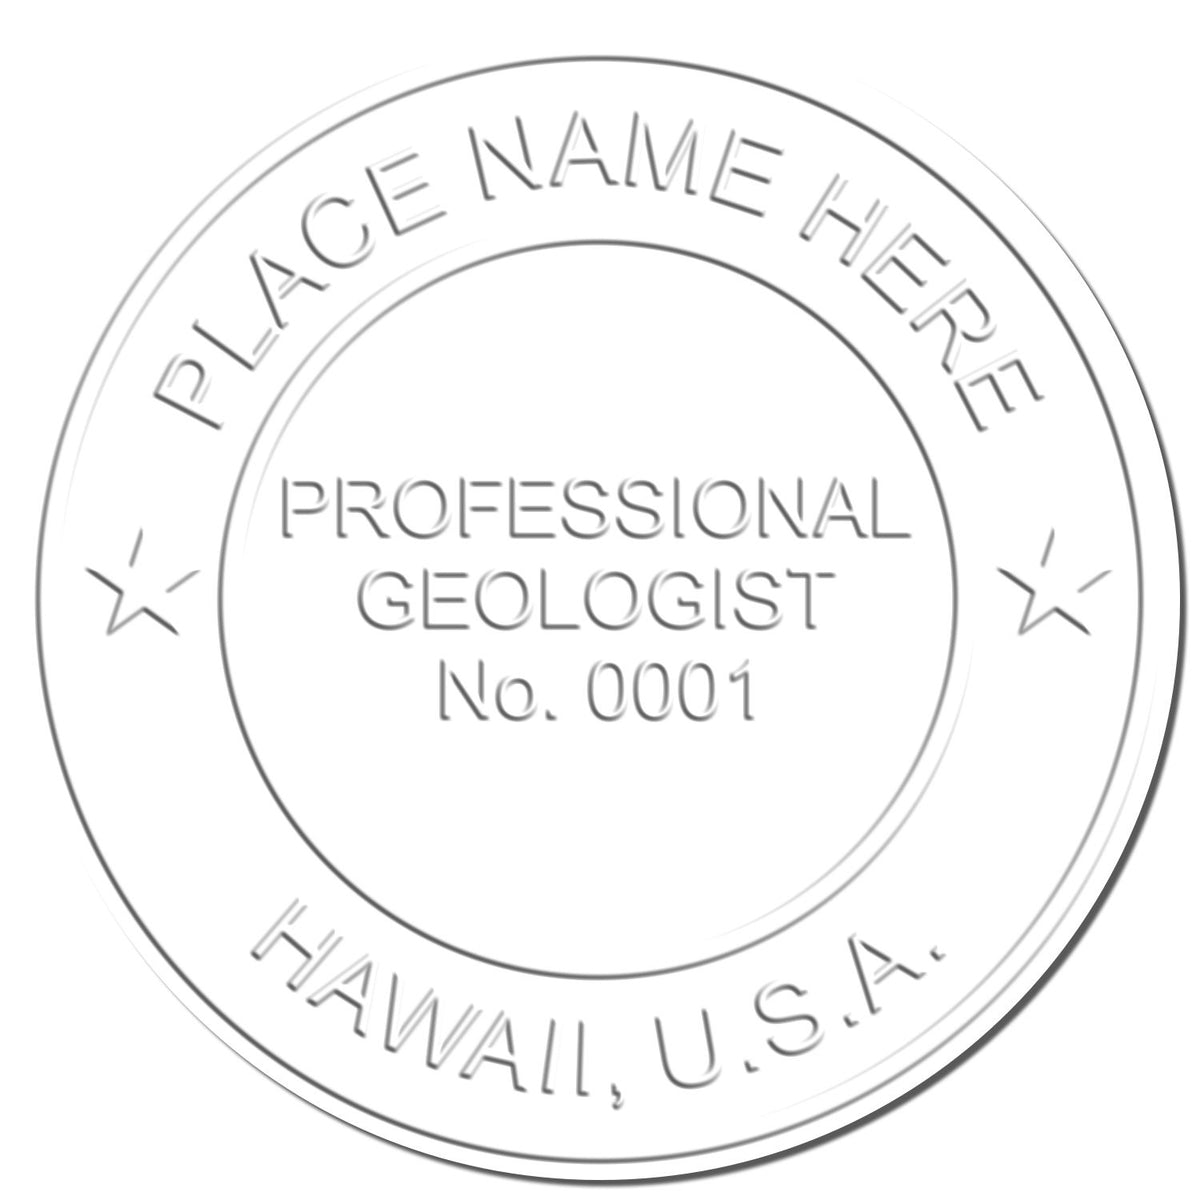 A photograph of the Hybrid Hawaii Geologist Seal stamp impression reveals a vivid, professional image of the on paper.